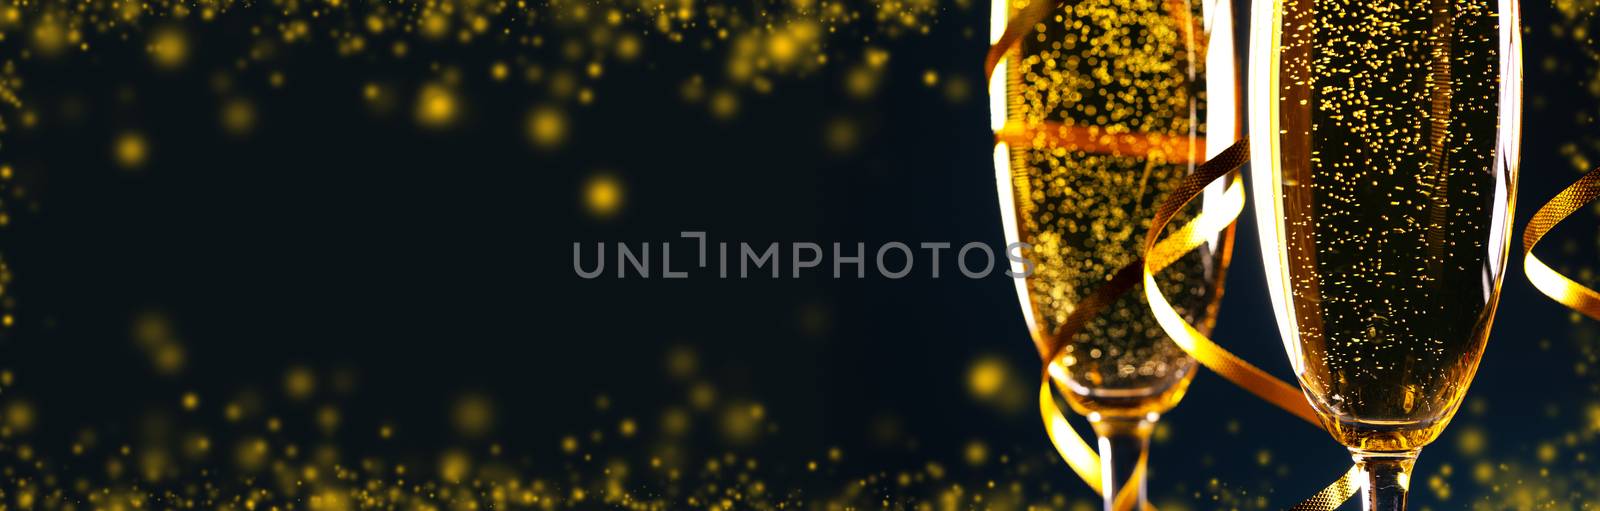 Champagne glasses with golden ribbon by Yellowj